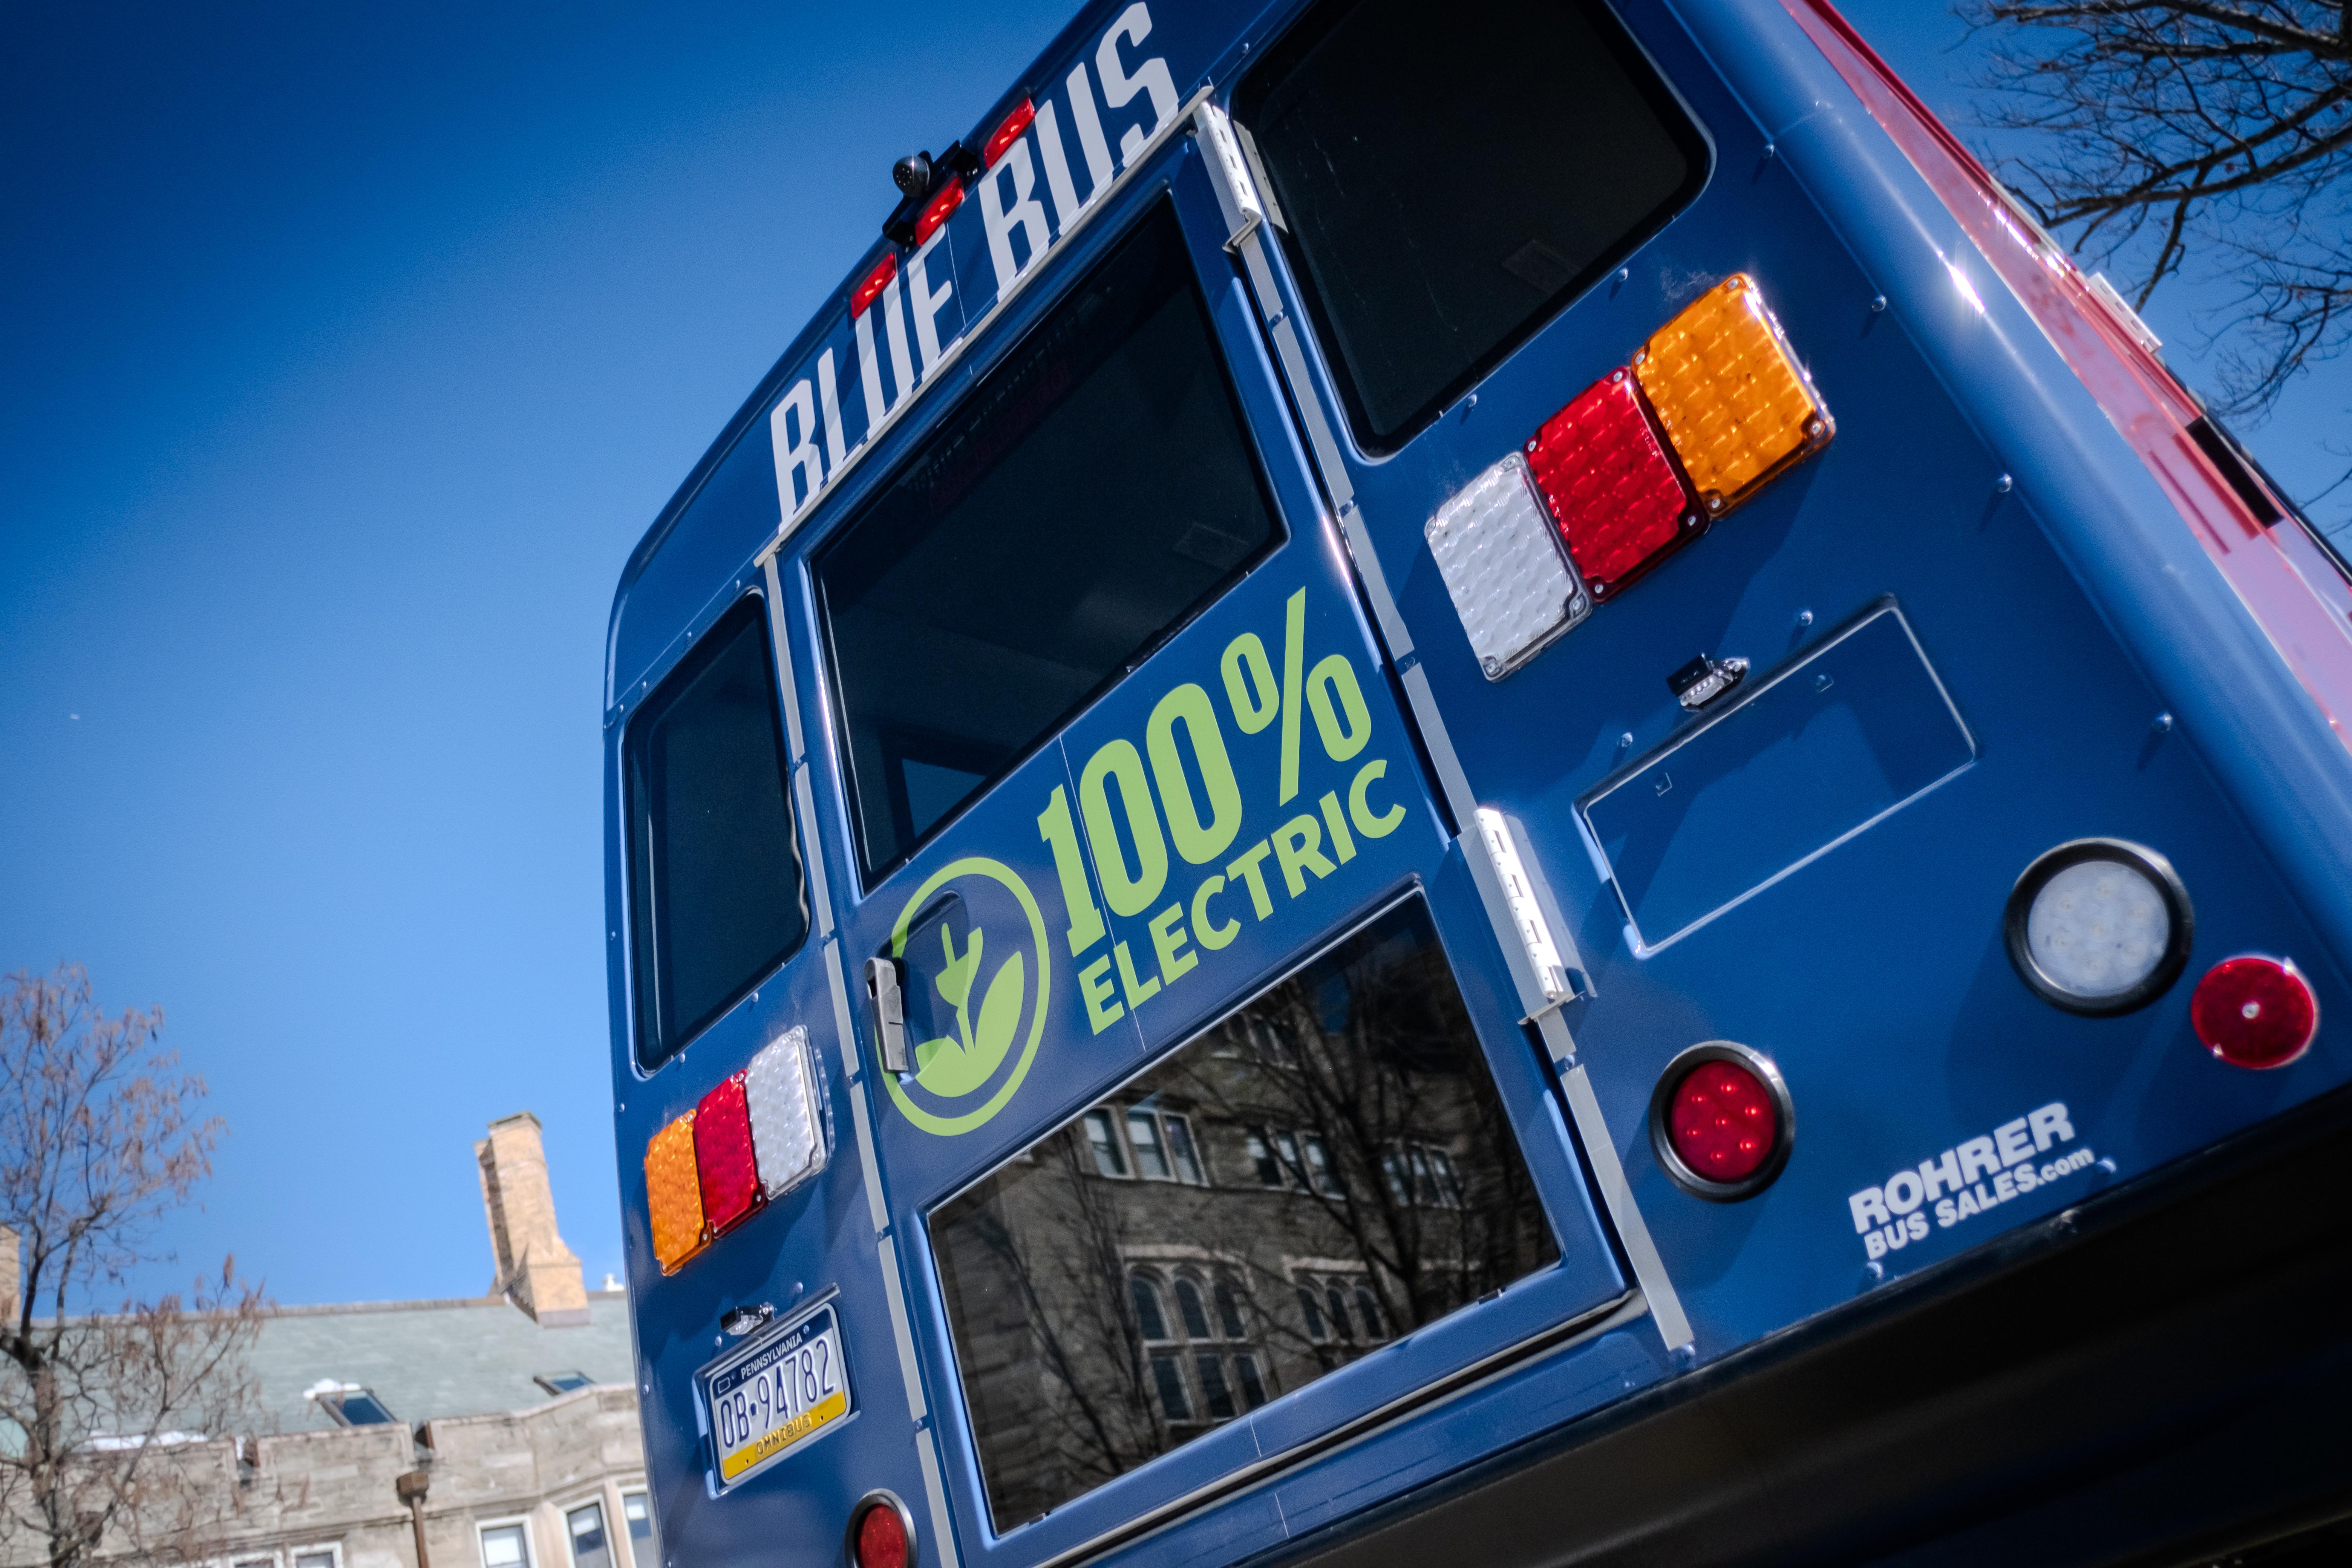 The new electric Blue Bus.